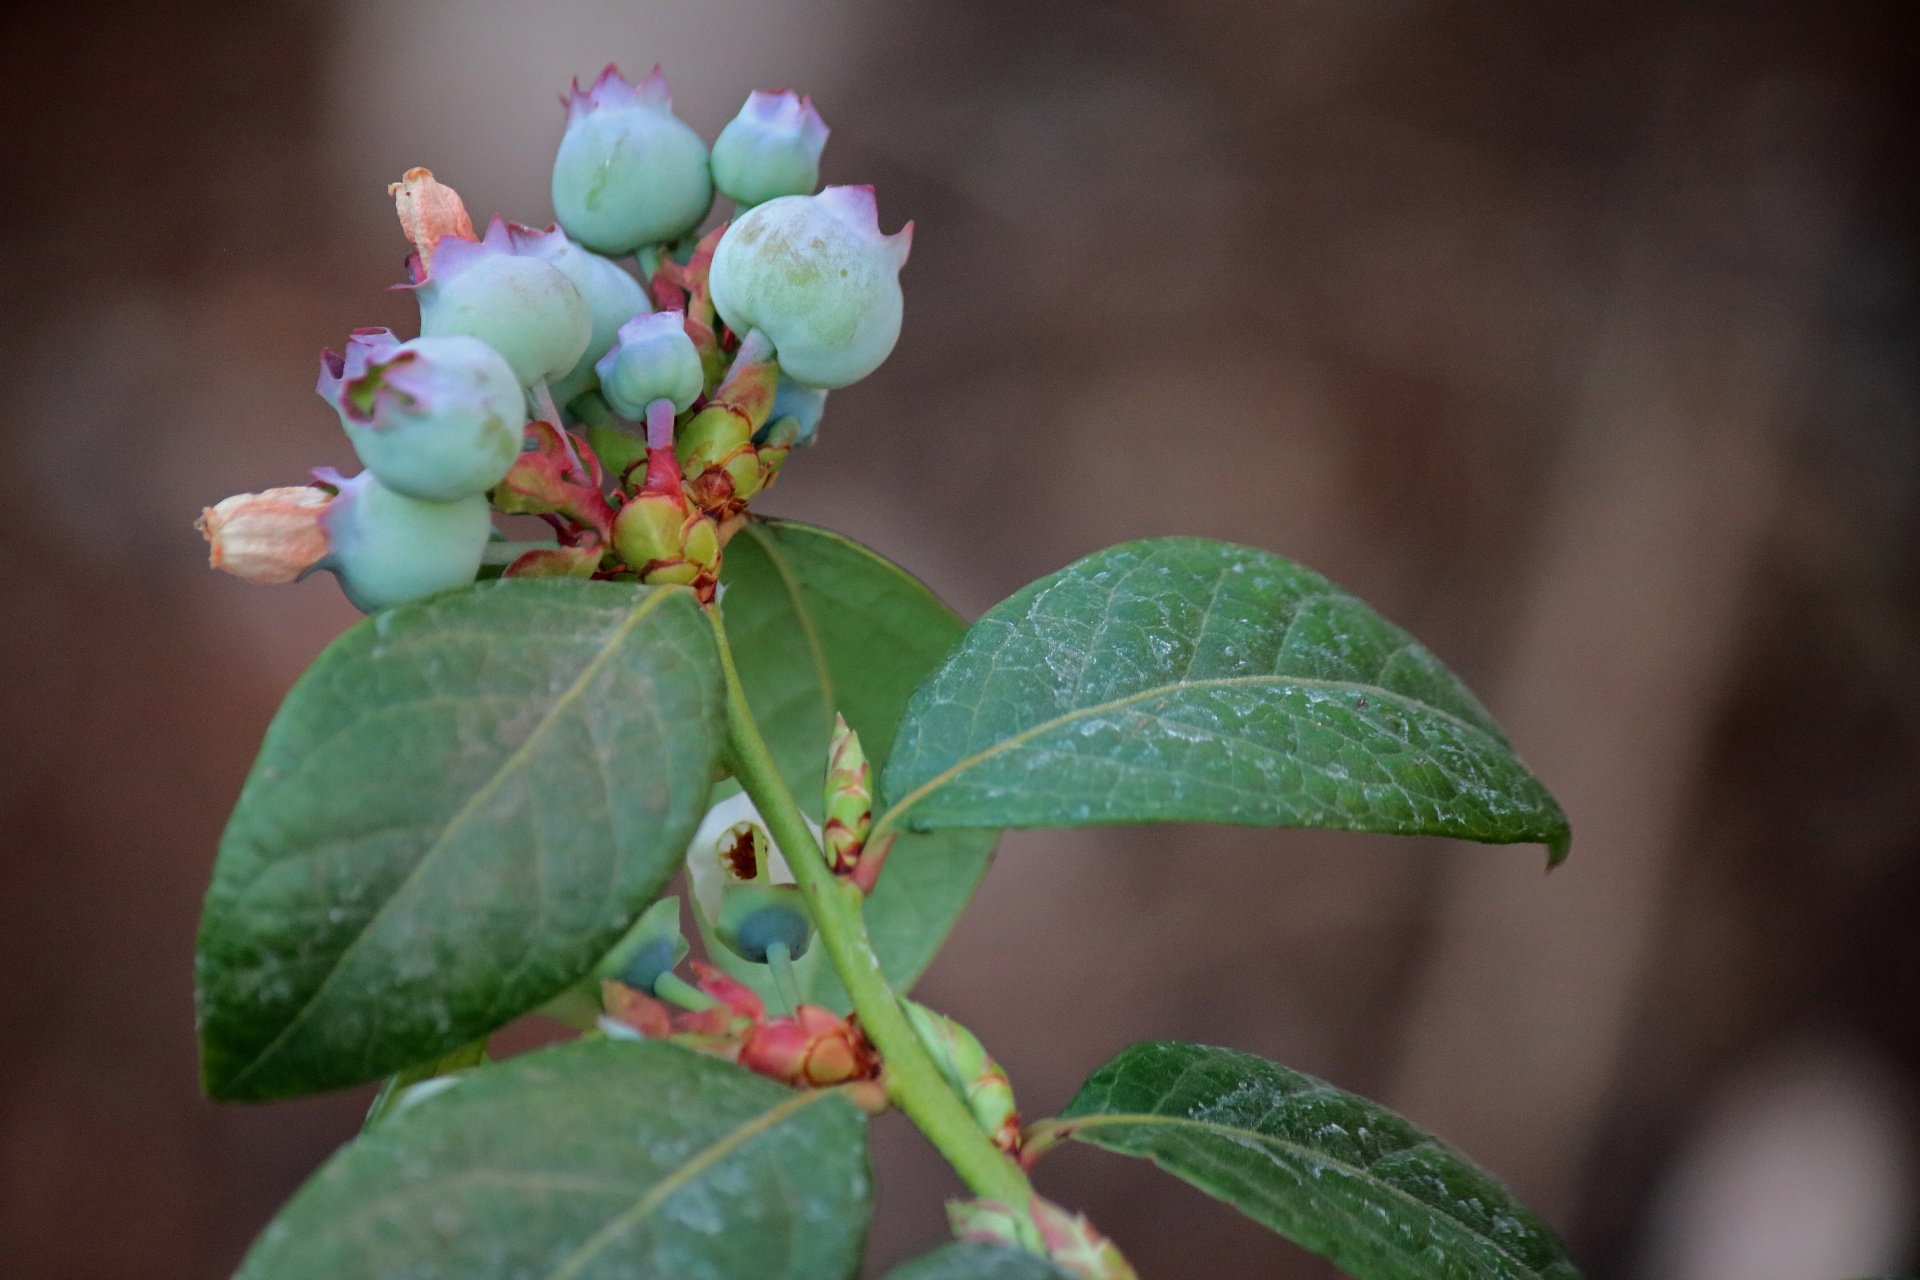 Ripening Blueberries On A Branch